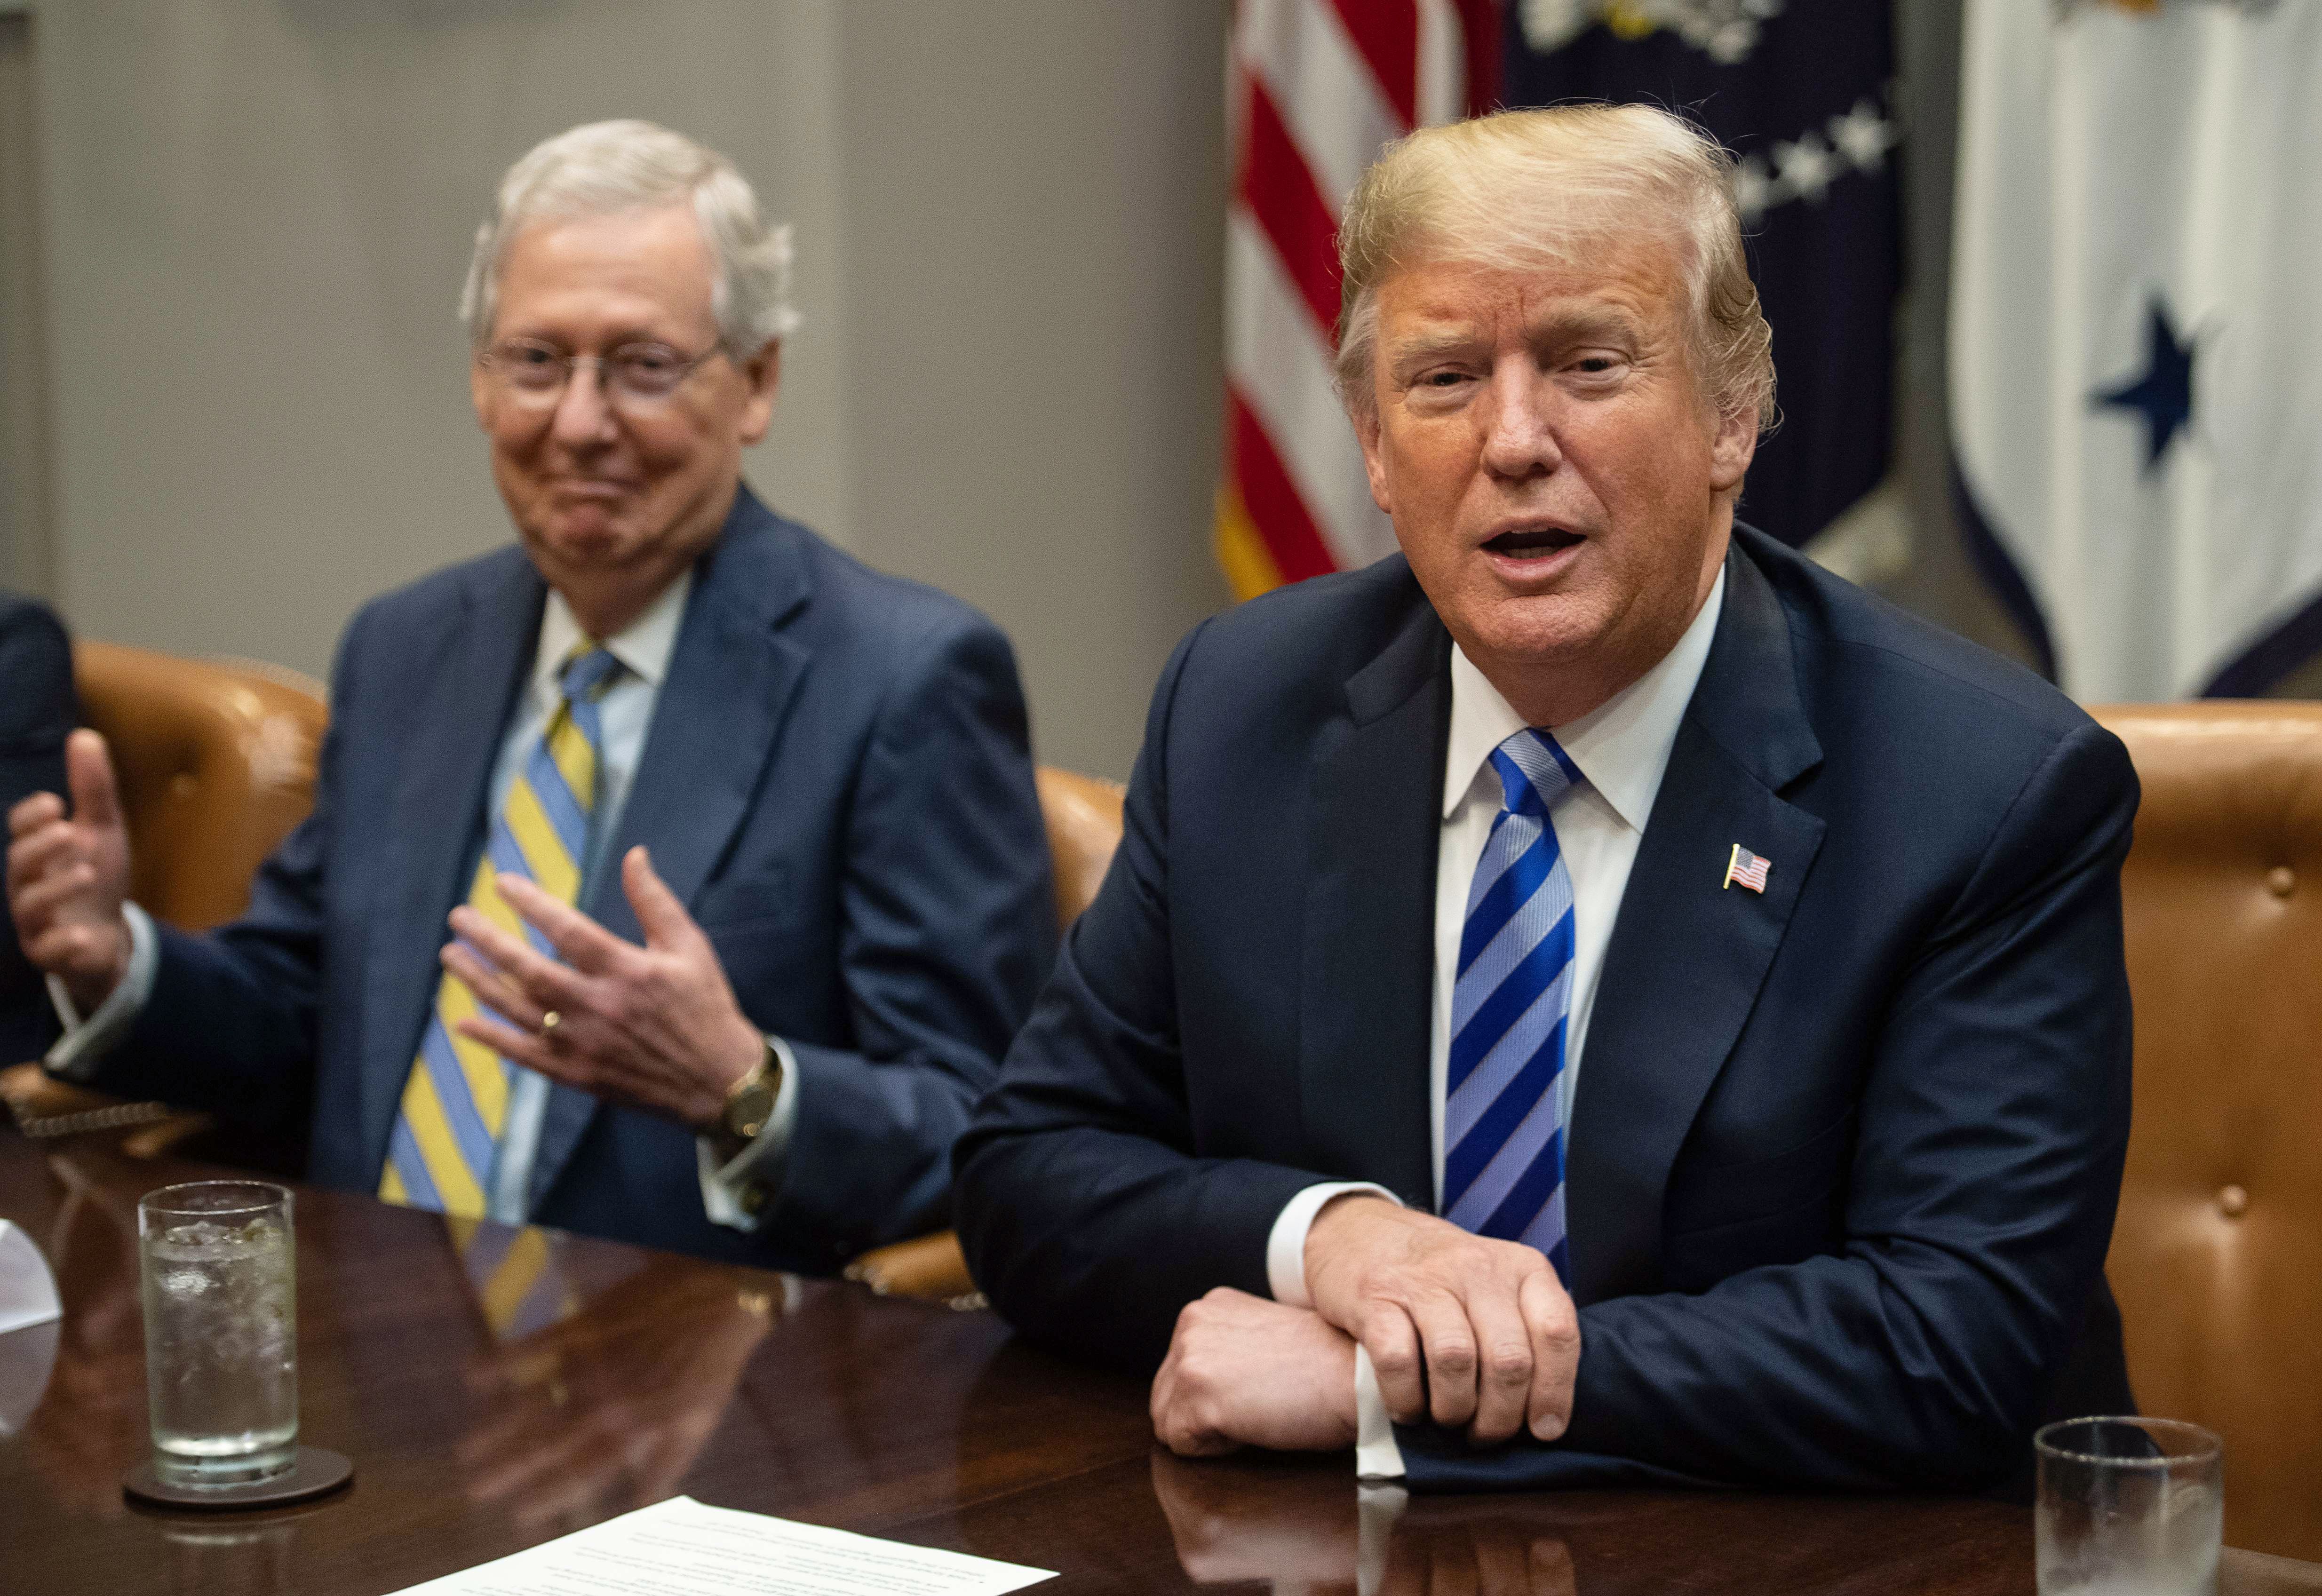 US Senate Majority Leader Mitch McConnell (L) reacts as President Donald Trump speaks to the press before a meeting with Republican Congressional leaders at the White House in Washington, DC, on September 5, 2018. (Photo by NICHOLAS KAMM / AFP) (Photo credit should read NICHOLAS KAMM/AFP via Getty Images)